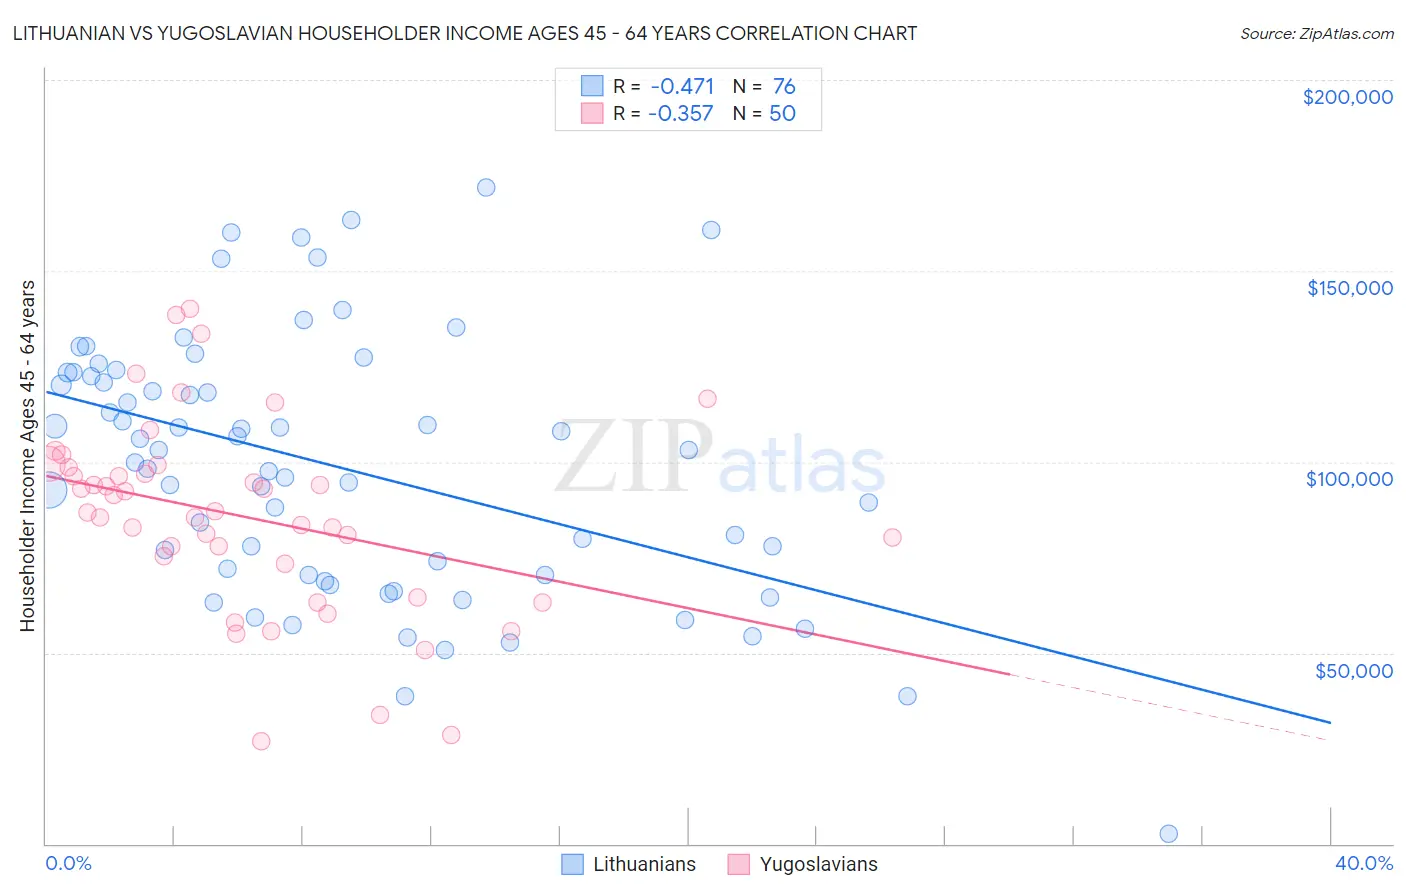 Lithuanian vs Yugoslavian Householder Income Ages 45 - 64 years